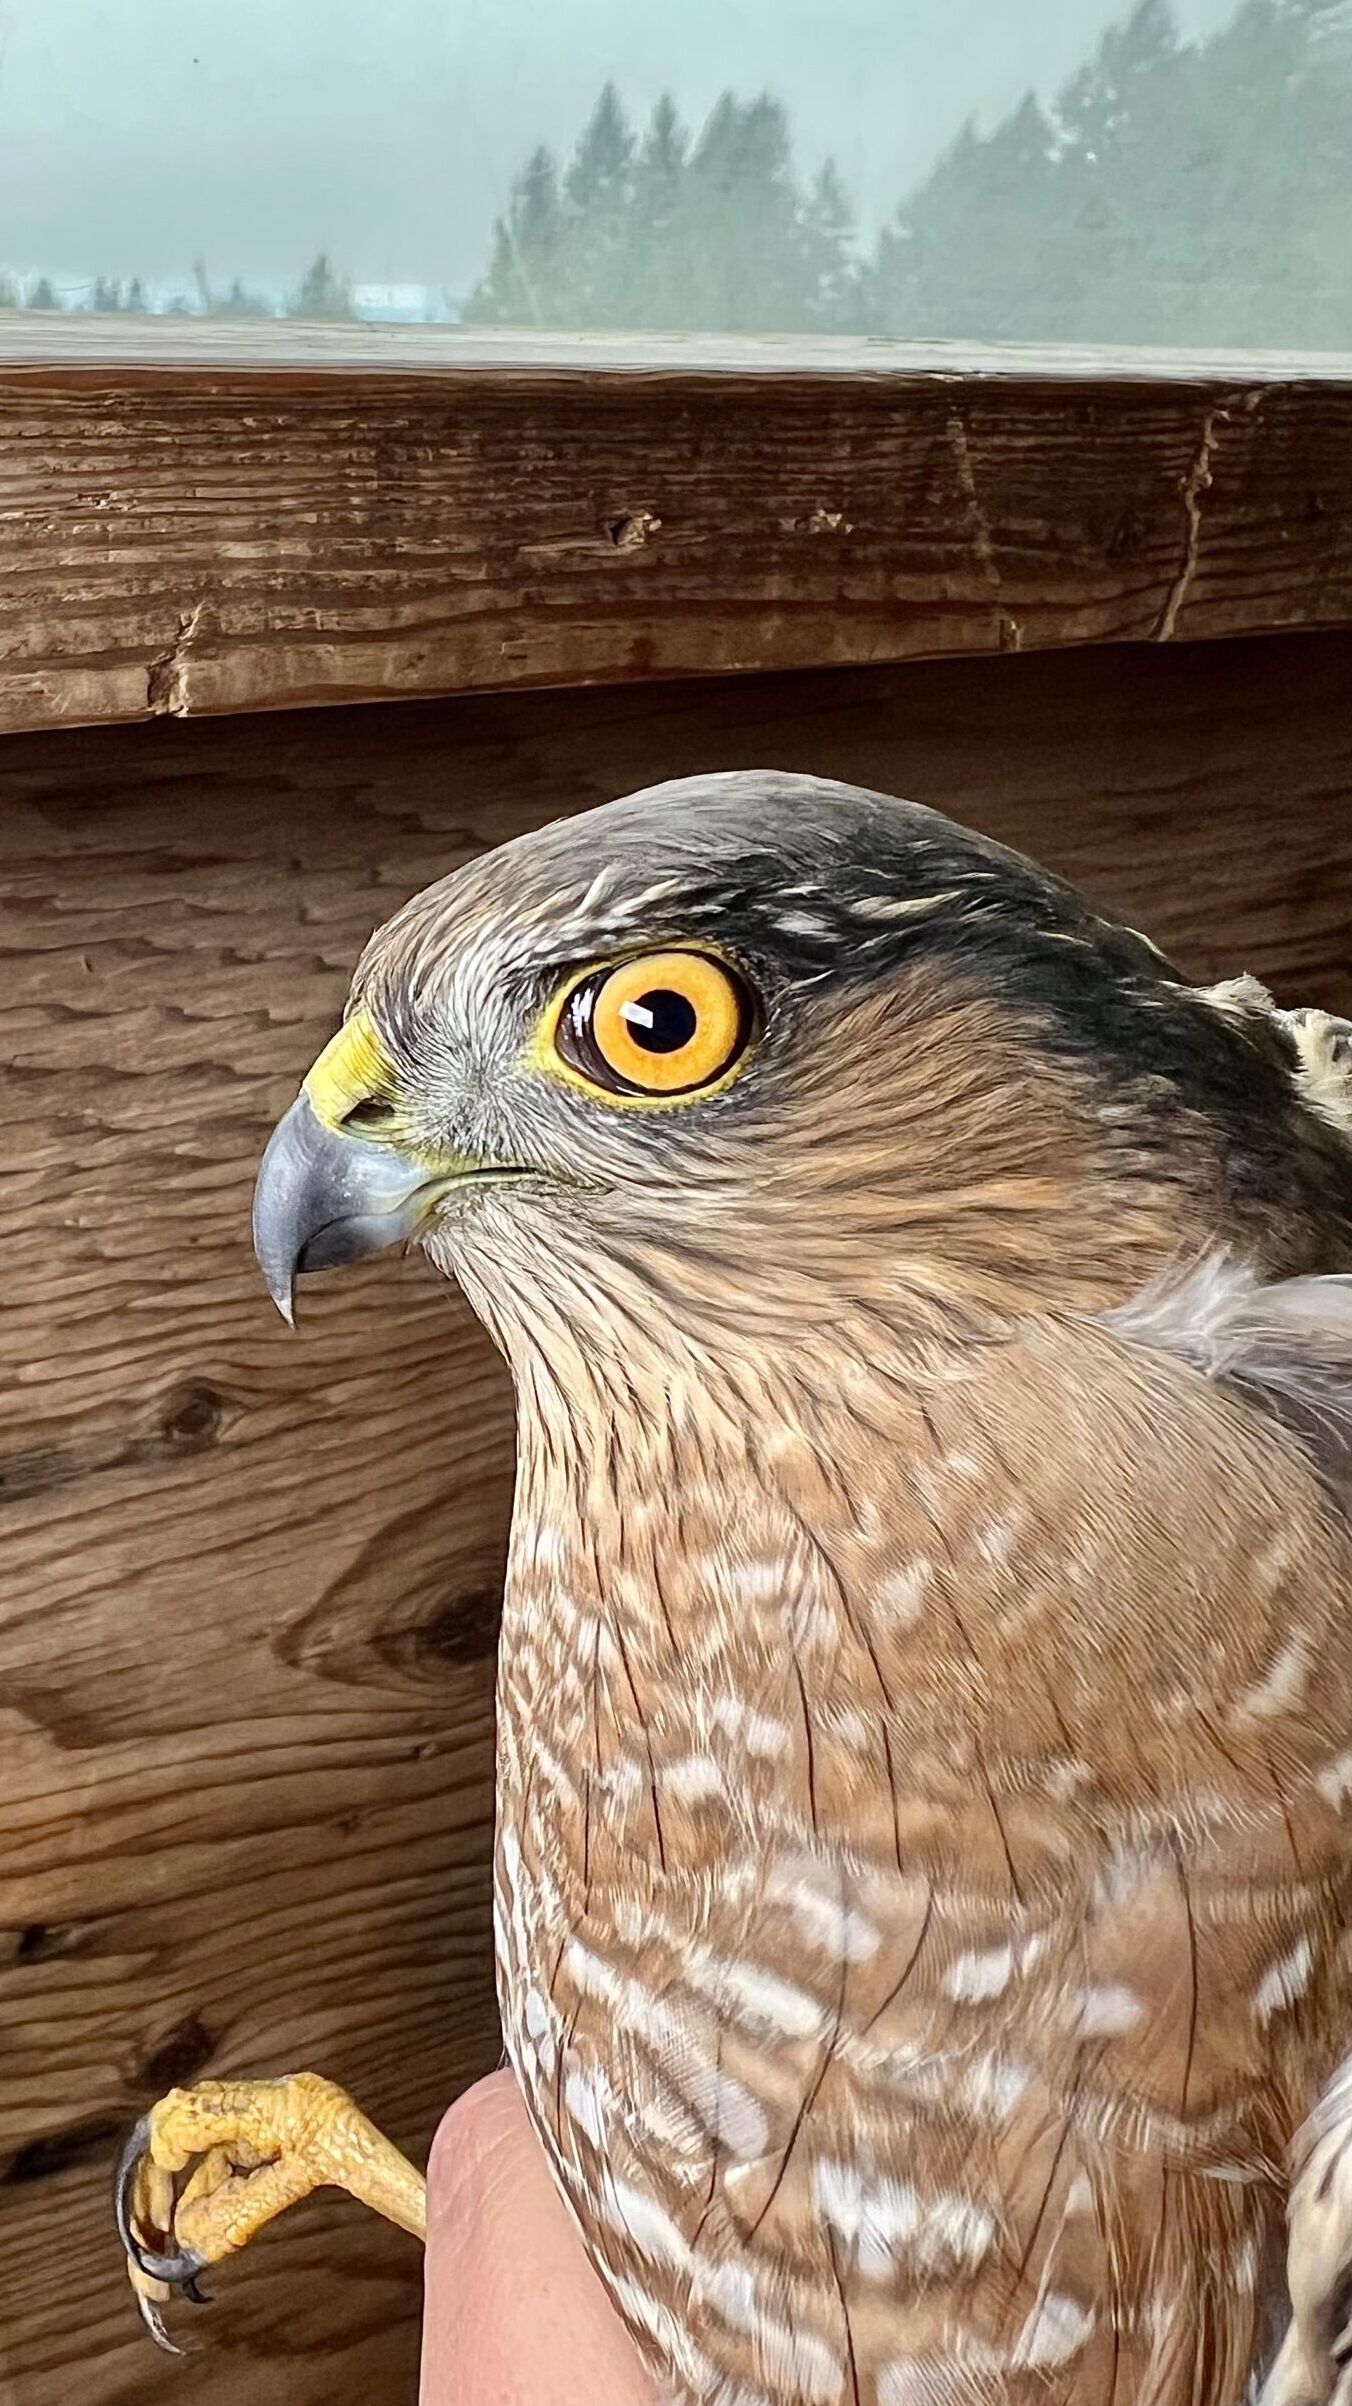 a sharp-shinned hawk with golden yellow eyes reminiscent of an intensely colored marigold flower. The background shows the wood grain walls of the trapping blind, and through the window in the back you can see a foggy forested scene.